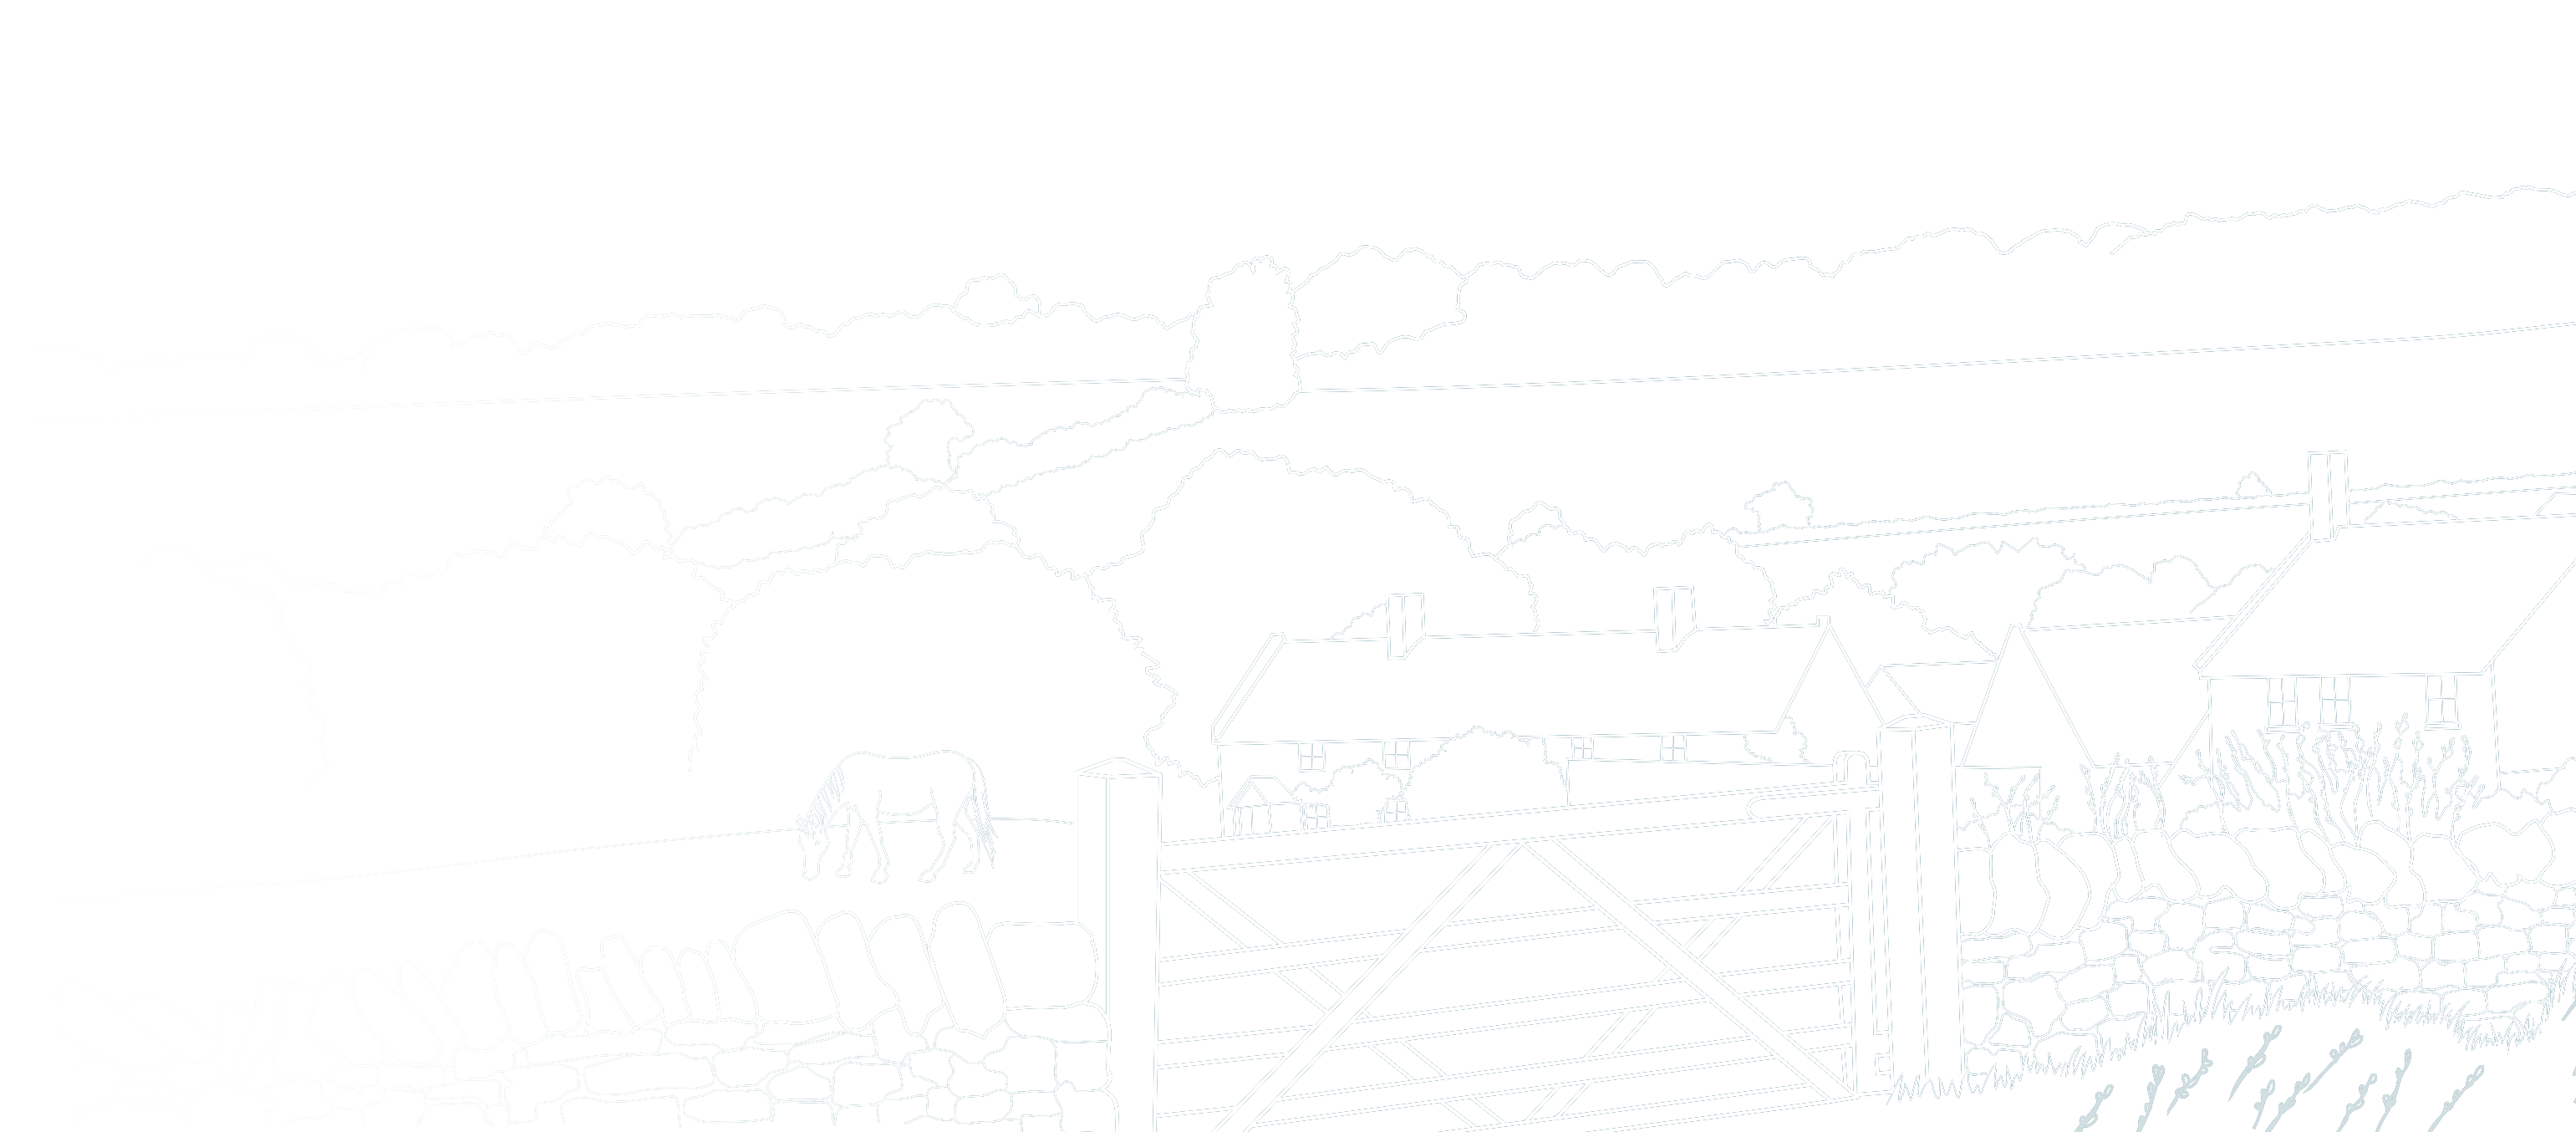 Illustration of countryside